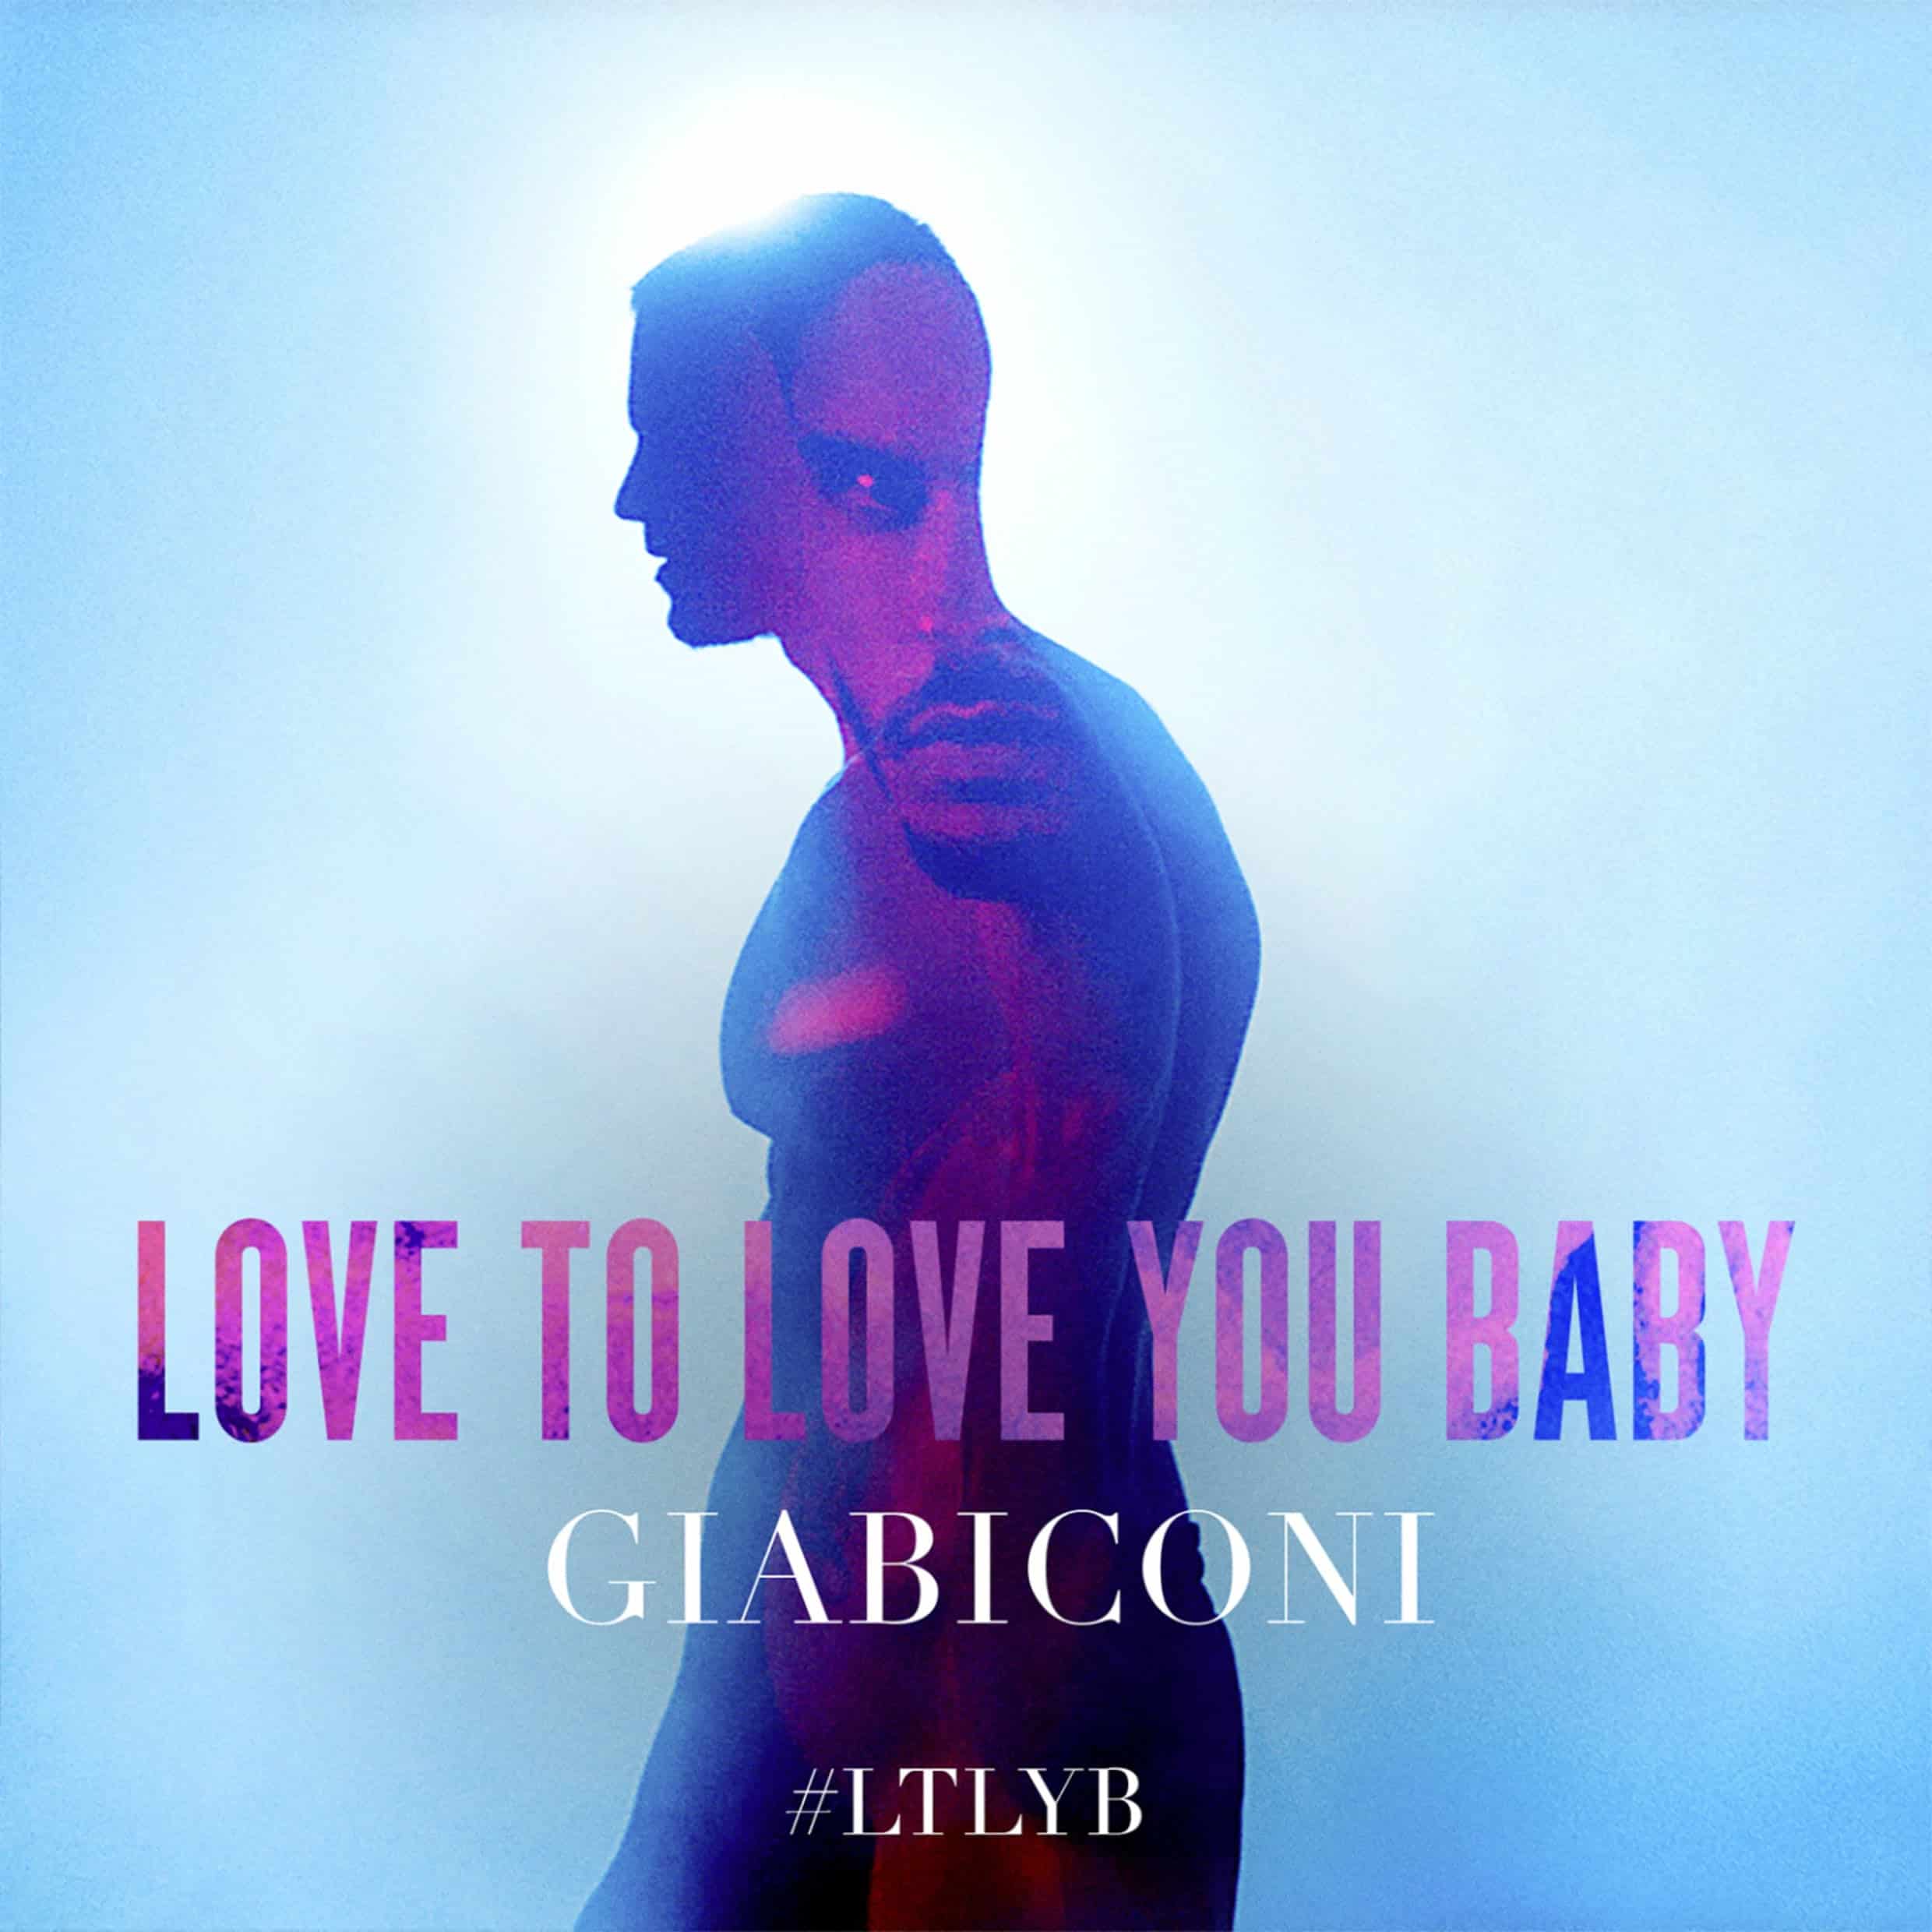 Giabiconi-Love-to-Love-You-Baby-2016-2480x2480